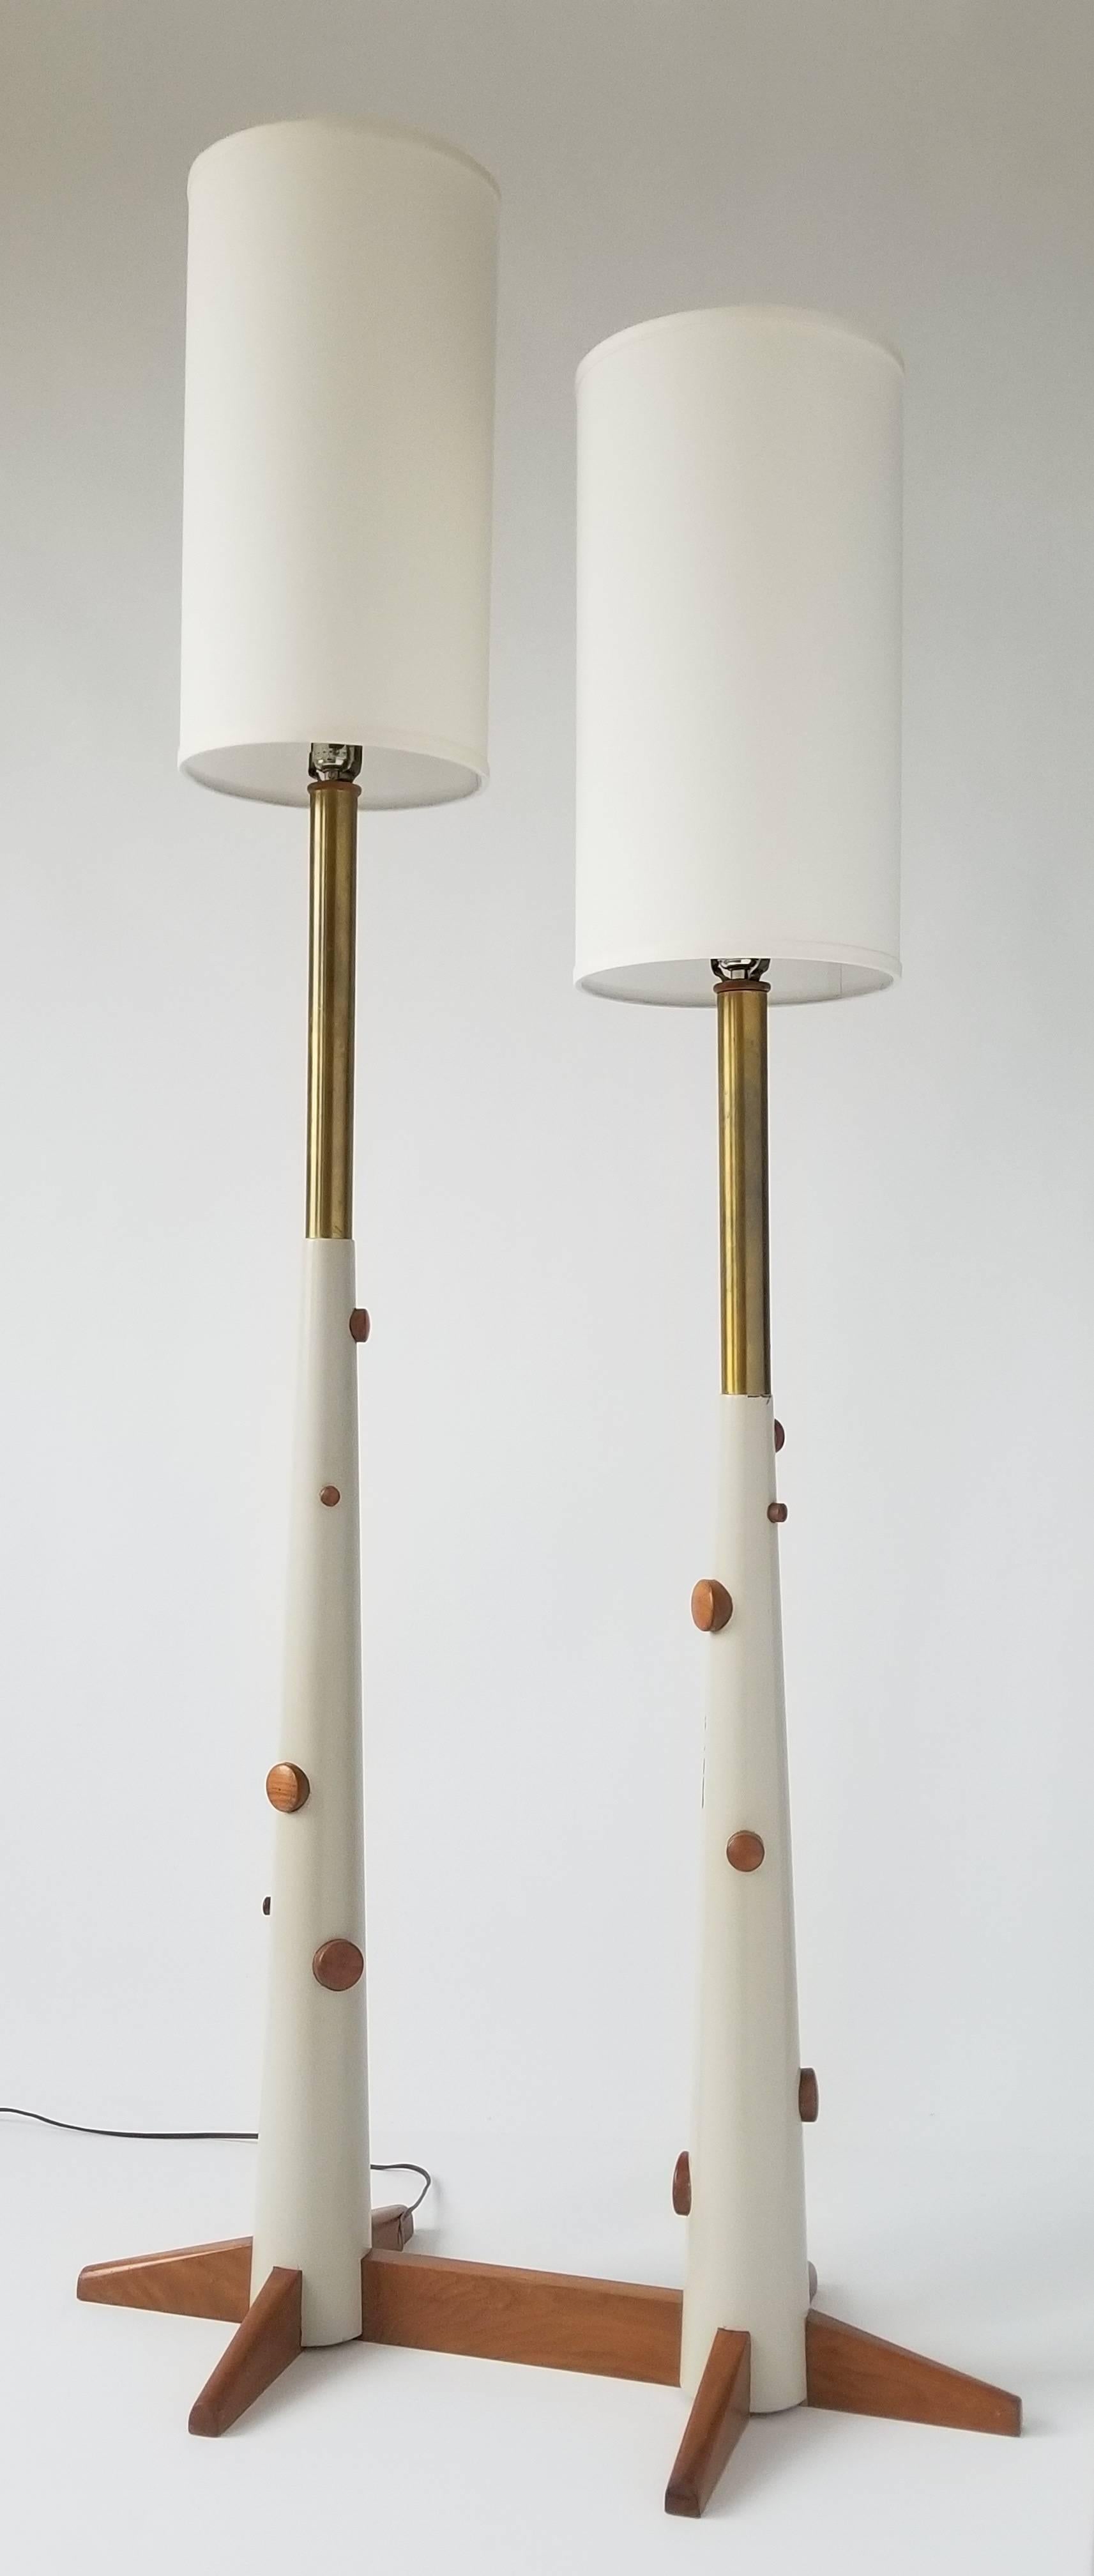 Mid-Century Modern 1960s Twin Pole Floor Lamp in Lacquered Wood and Brass , USA